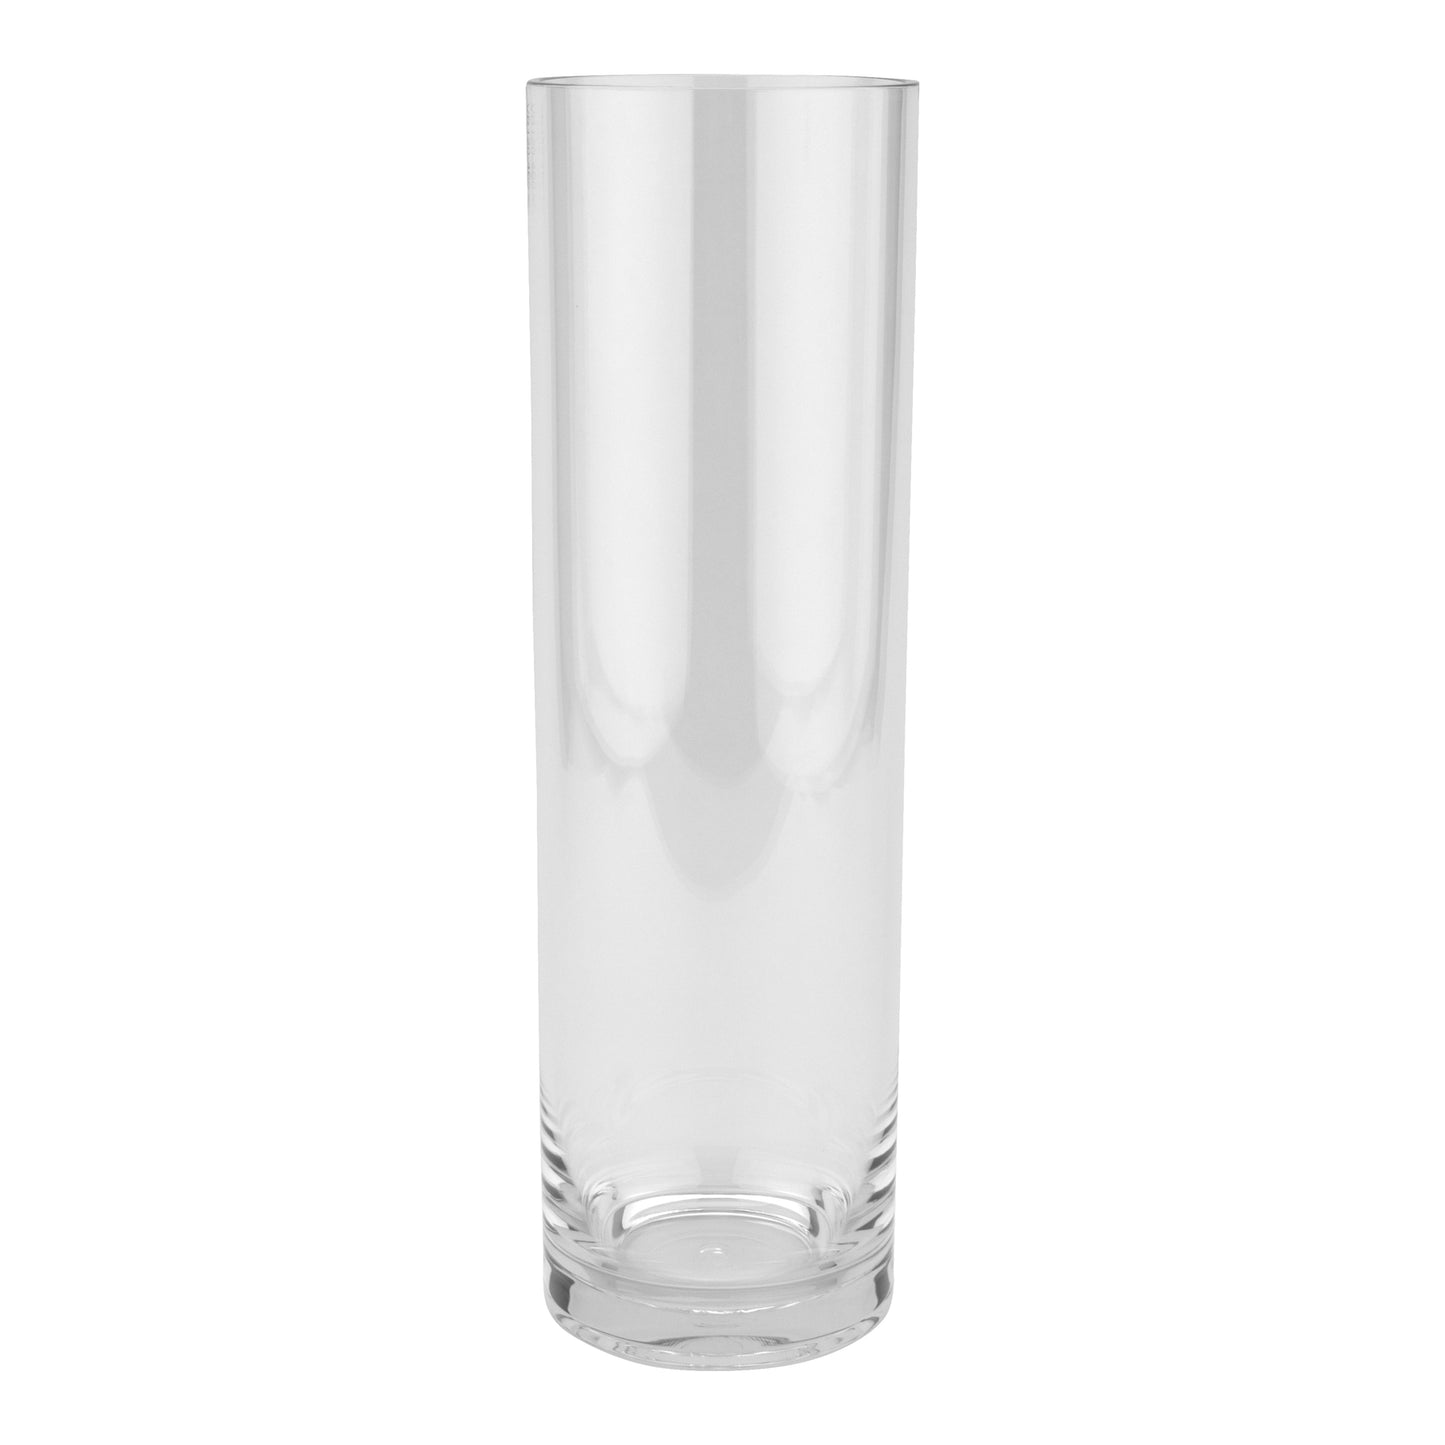 15.75" Tall, Tabletop, Display, Accent Vase, Break Resistant Plastic, 4.75" dia., G.E.T. Table Accessories